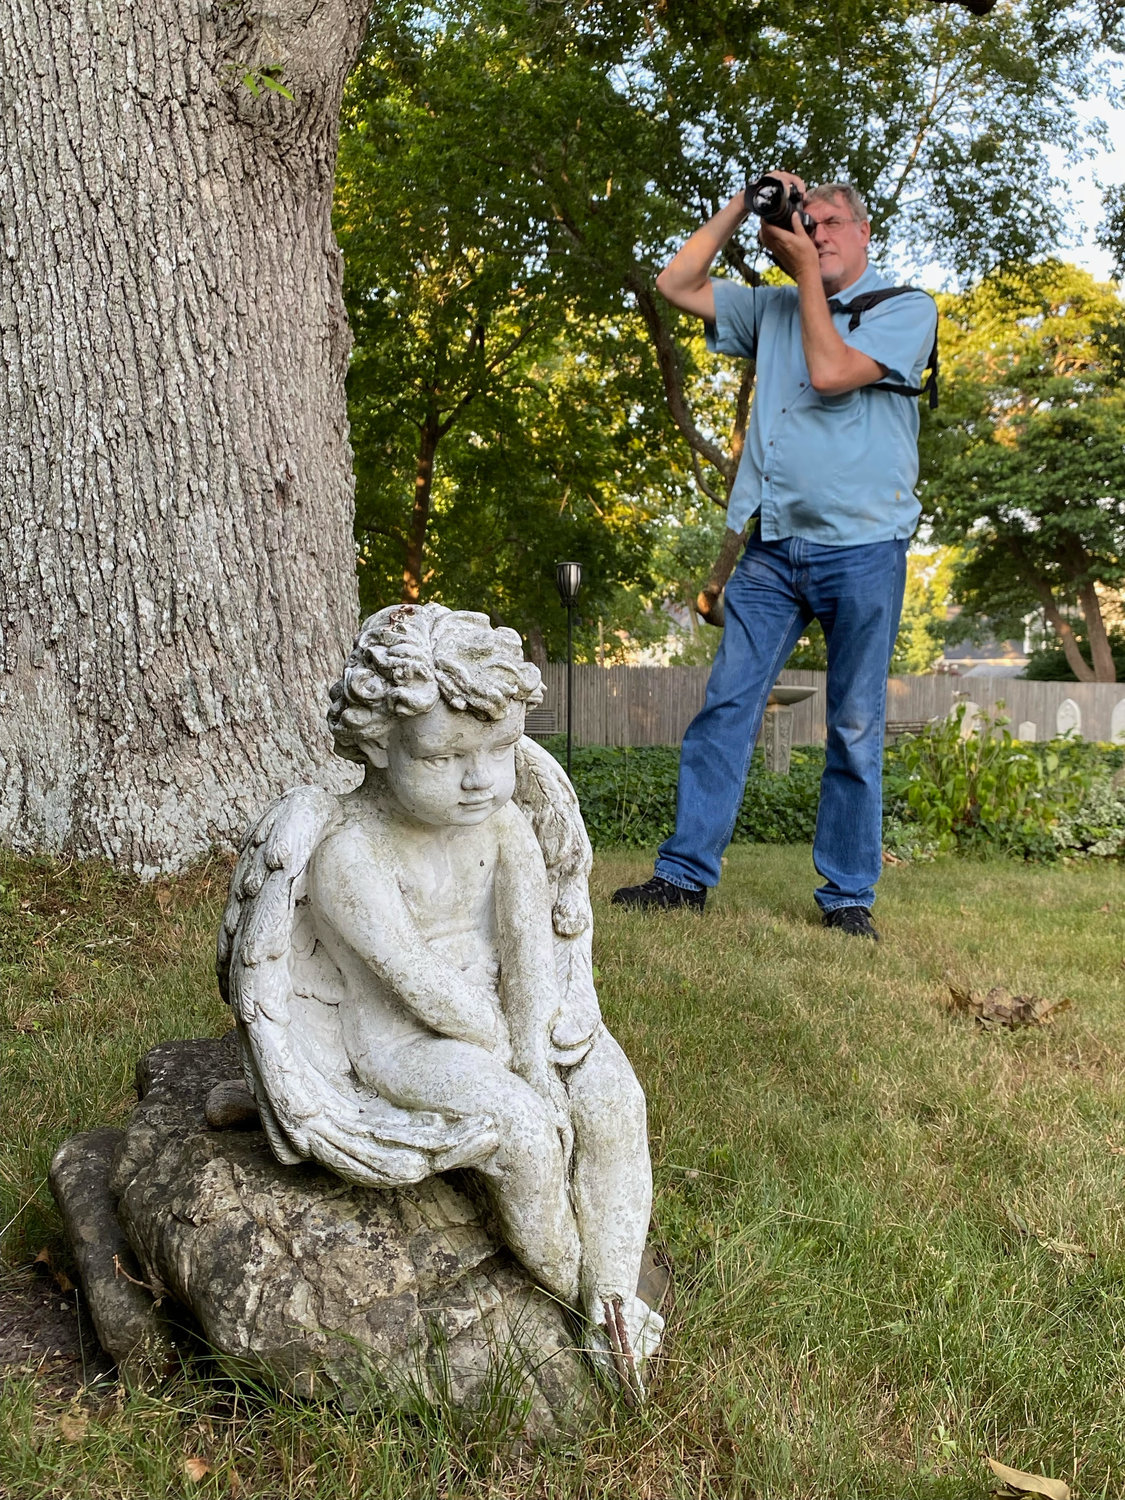 The grounds of St. John’s carry on its long history with many statues donated and dedicated to community members.